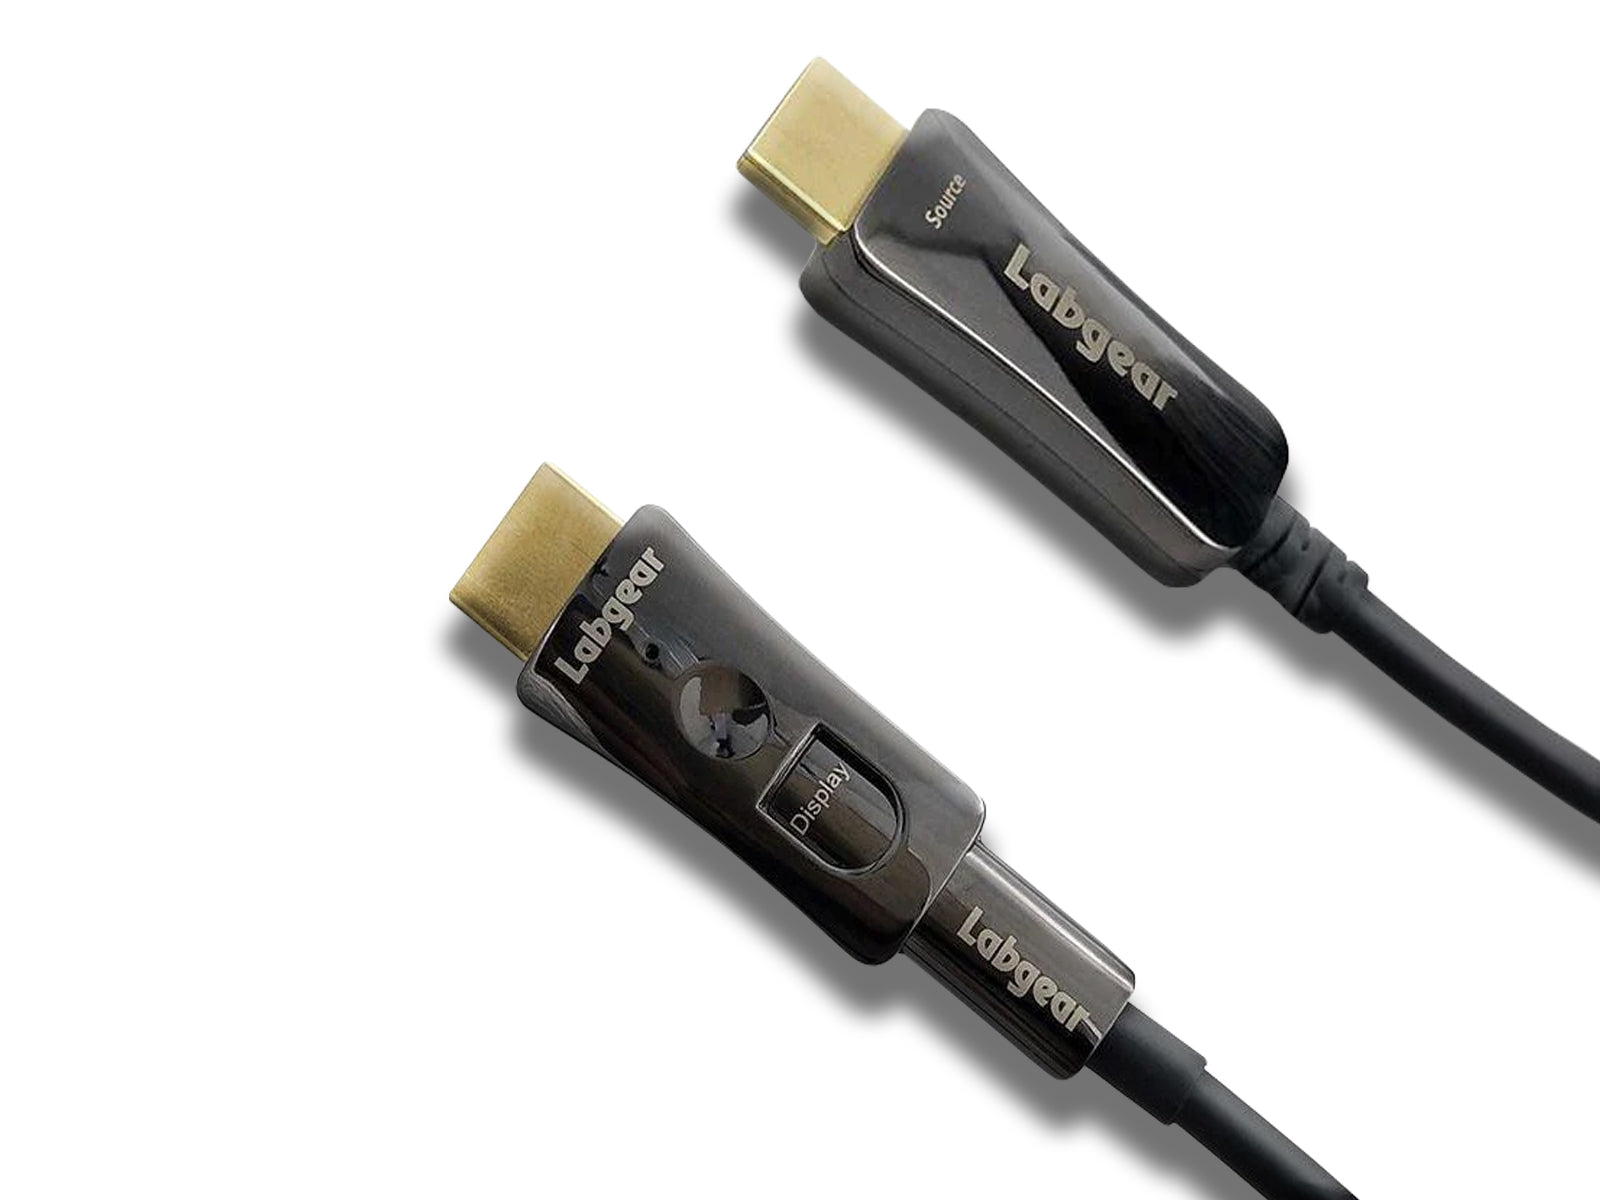 Image-of-the-plugs-of-the-labgear-hdmi-cable-on-the-white-background